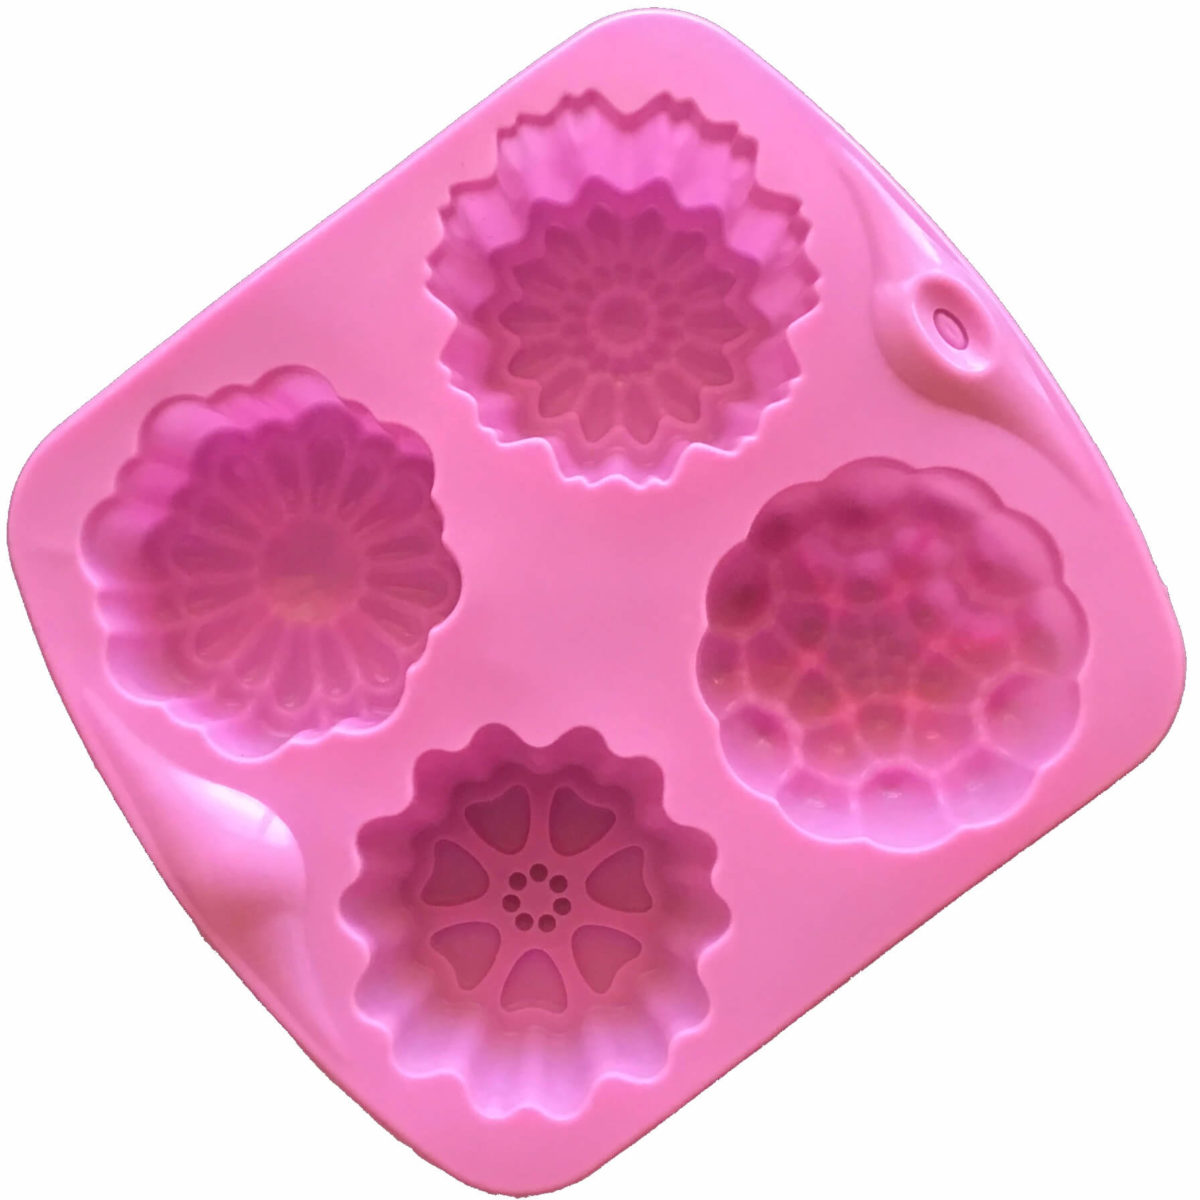 back of pink four cavity silicone mould with four individual floral designs